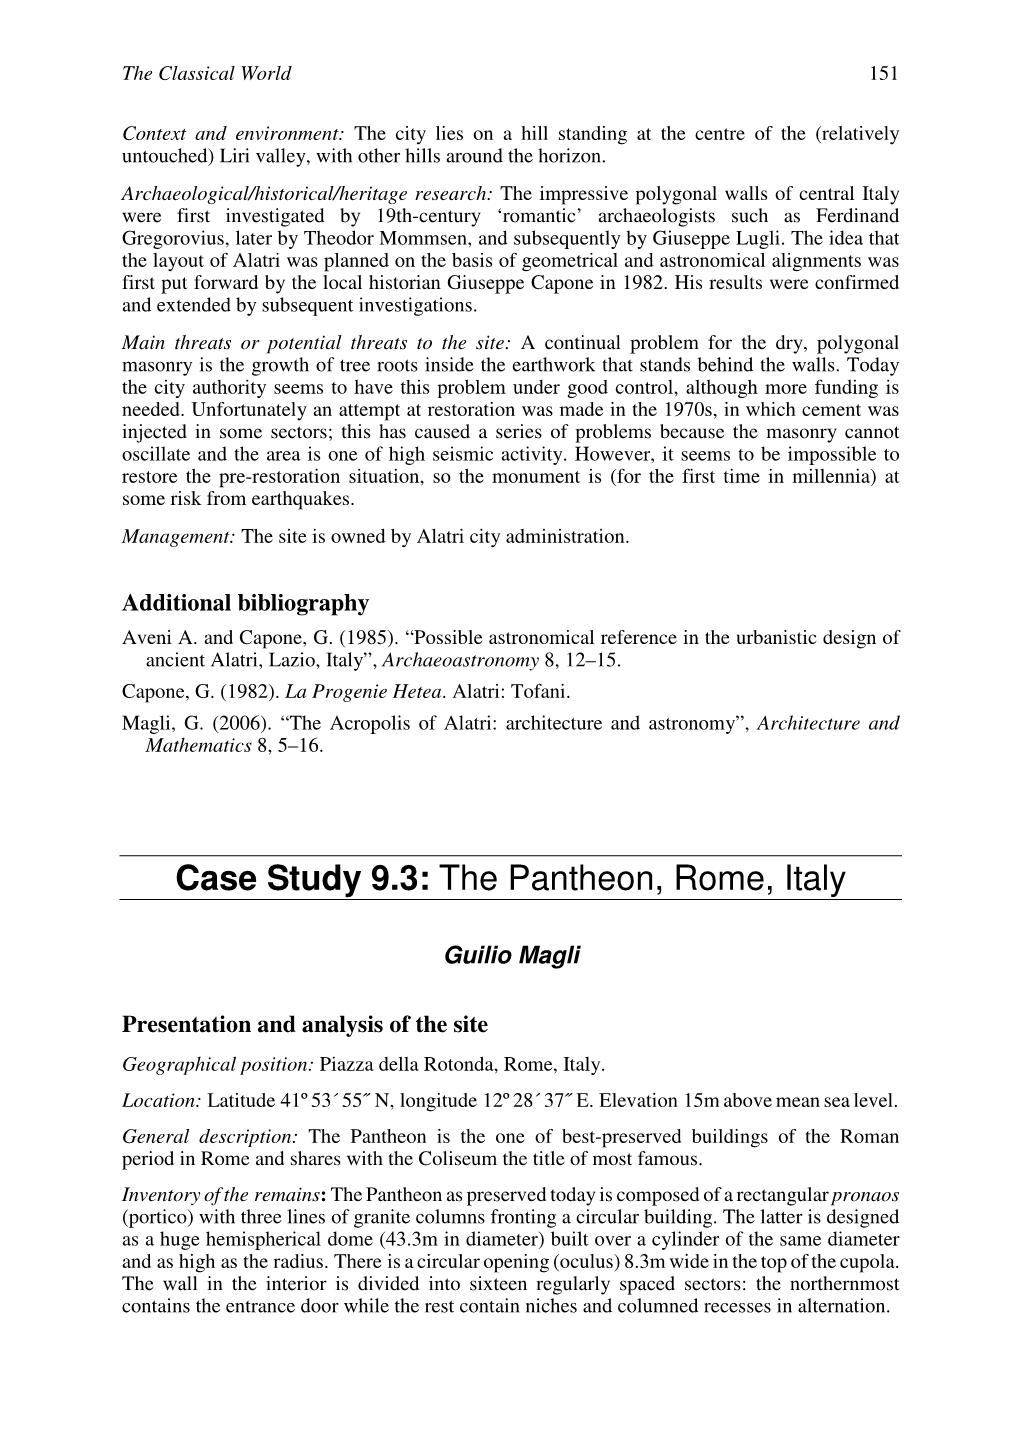 Case Study 9.3: the Pantheon, Rome, Italy